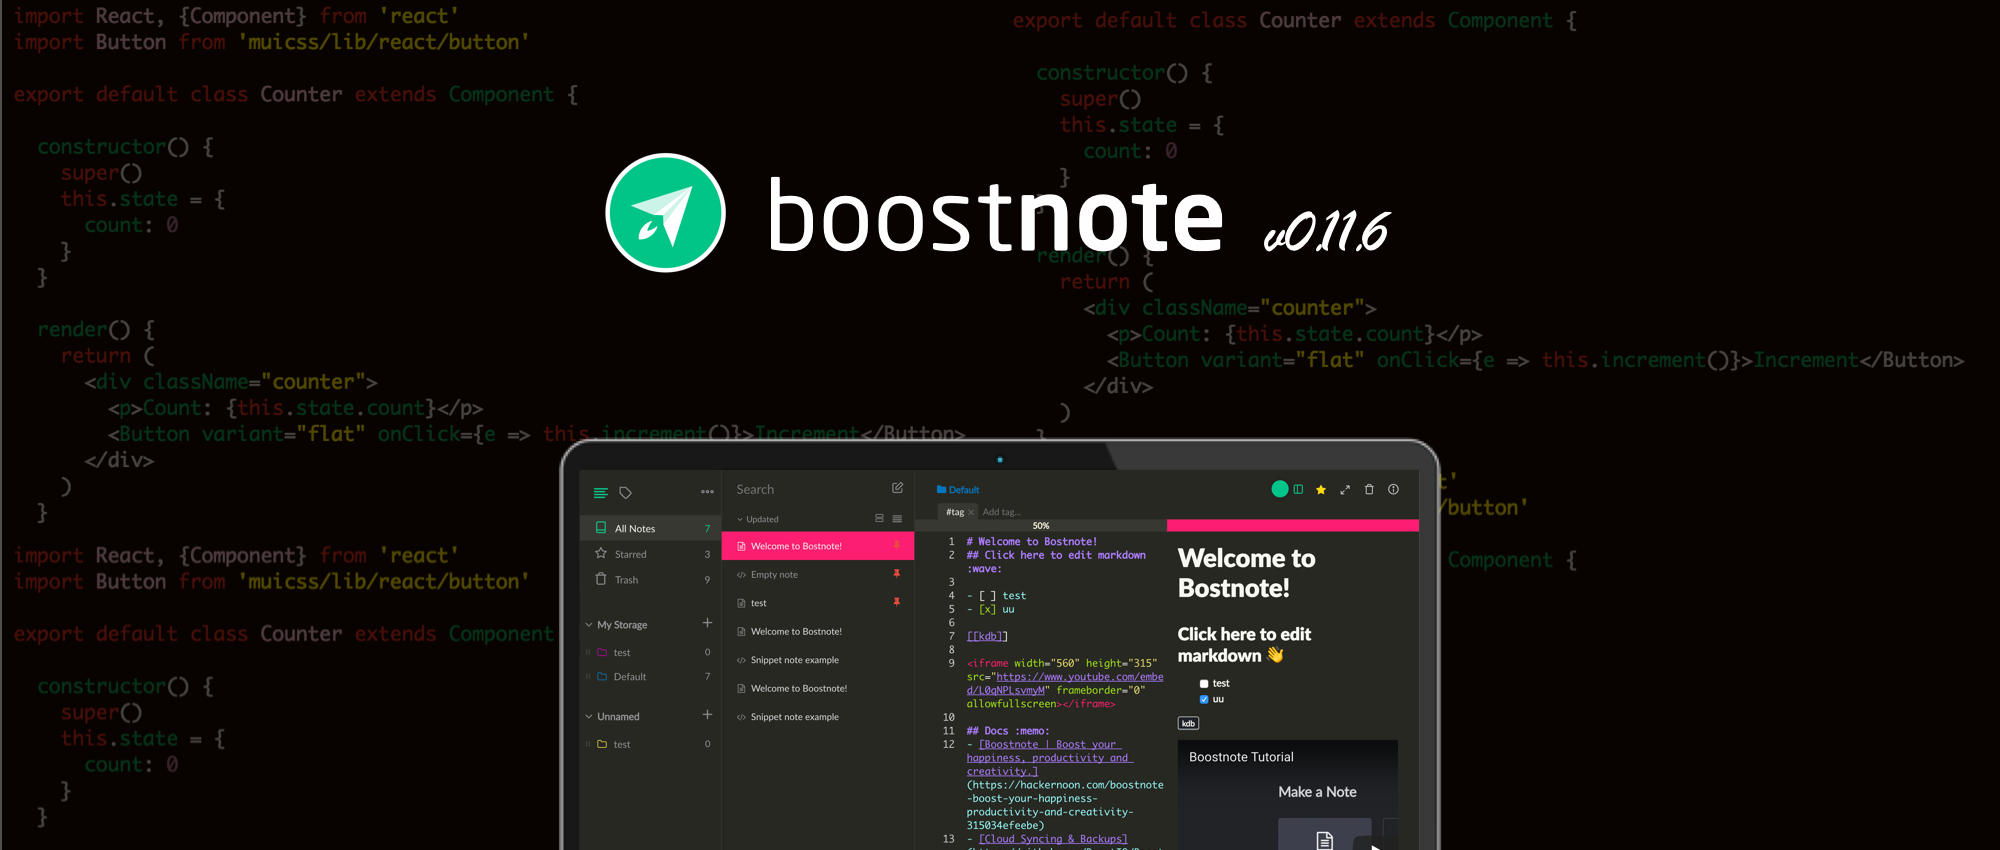 Boostnote V0 11 6 Release Subscribe To The Newsletter By Boost Note Boost Note Medium